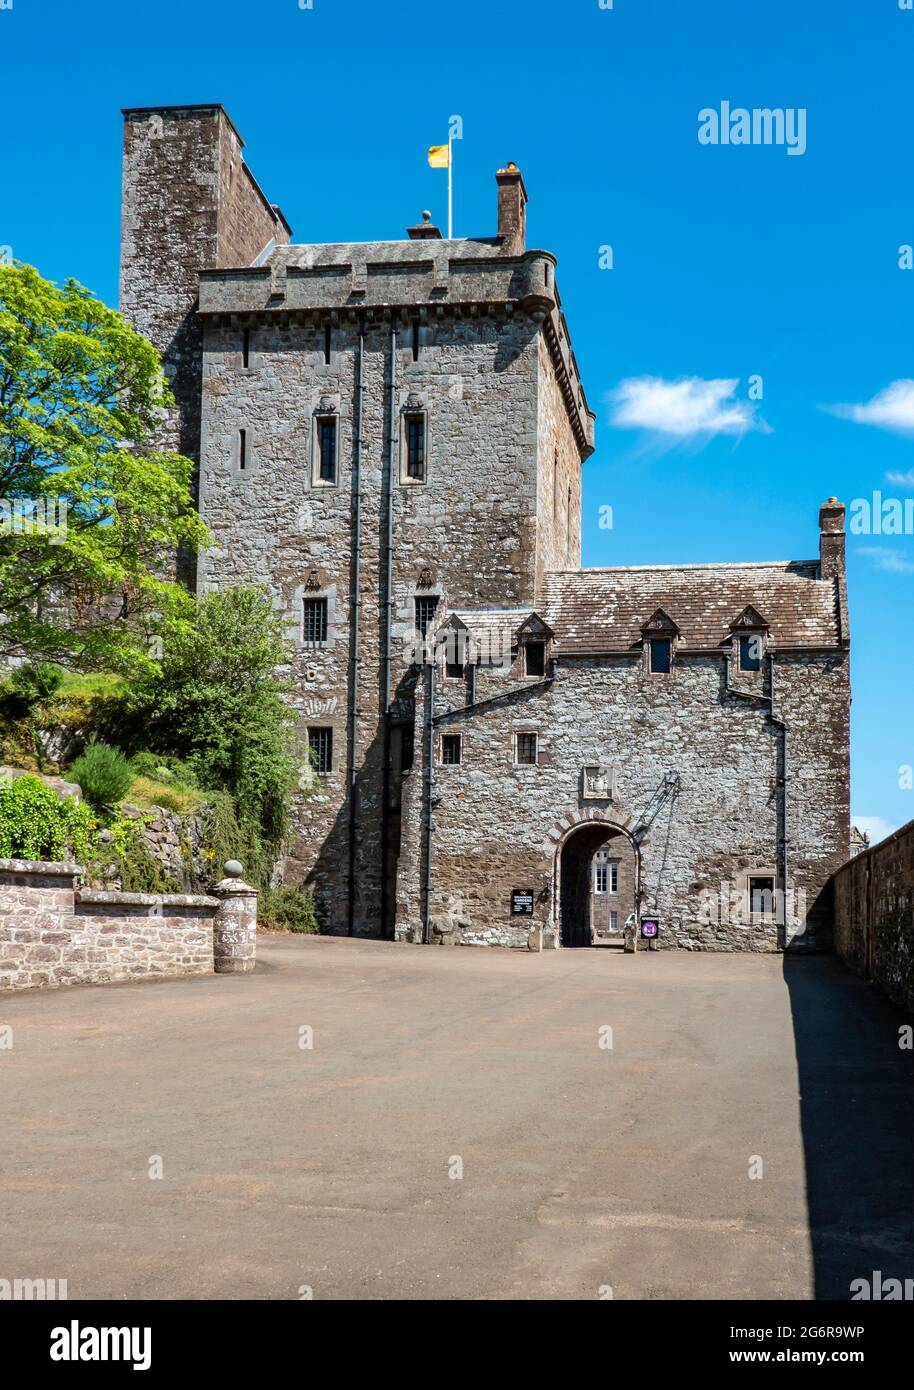 Entrance to Drummond Castle Gardens Muthill Crief Perth and Kinross Scotland UK Stock Photo